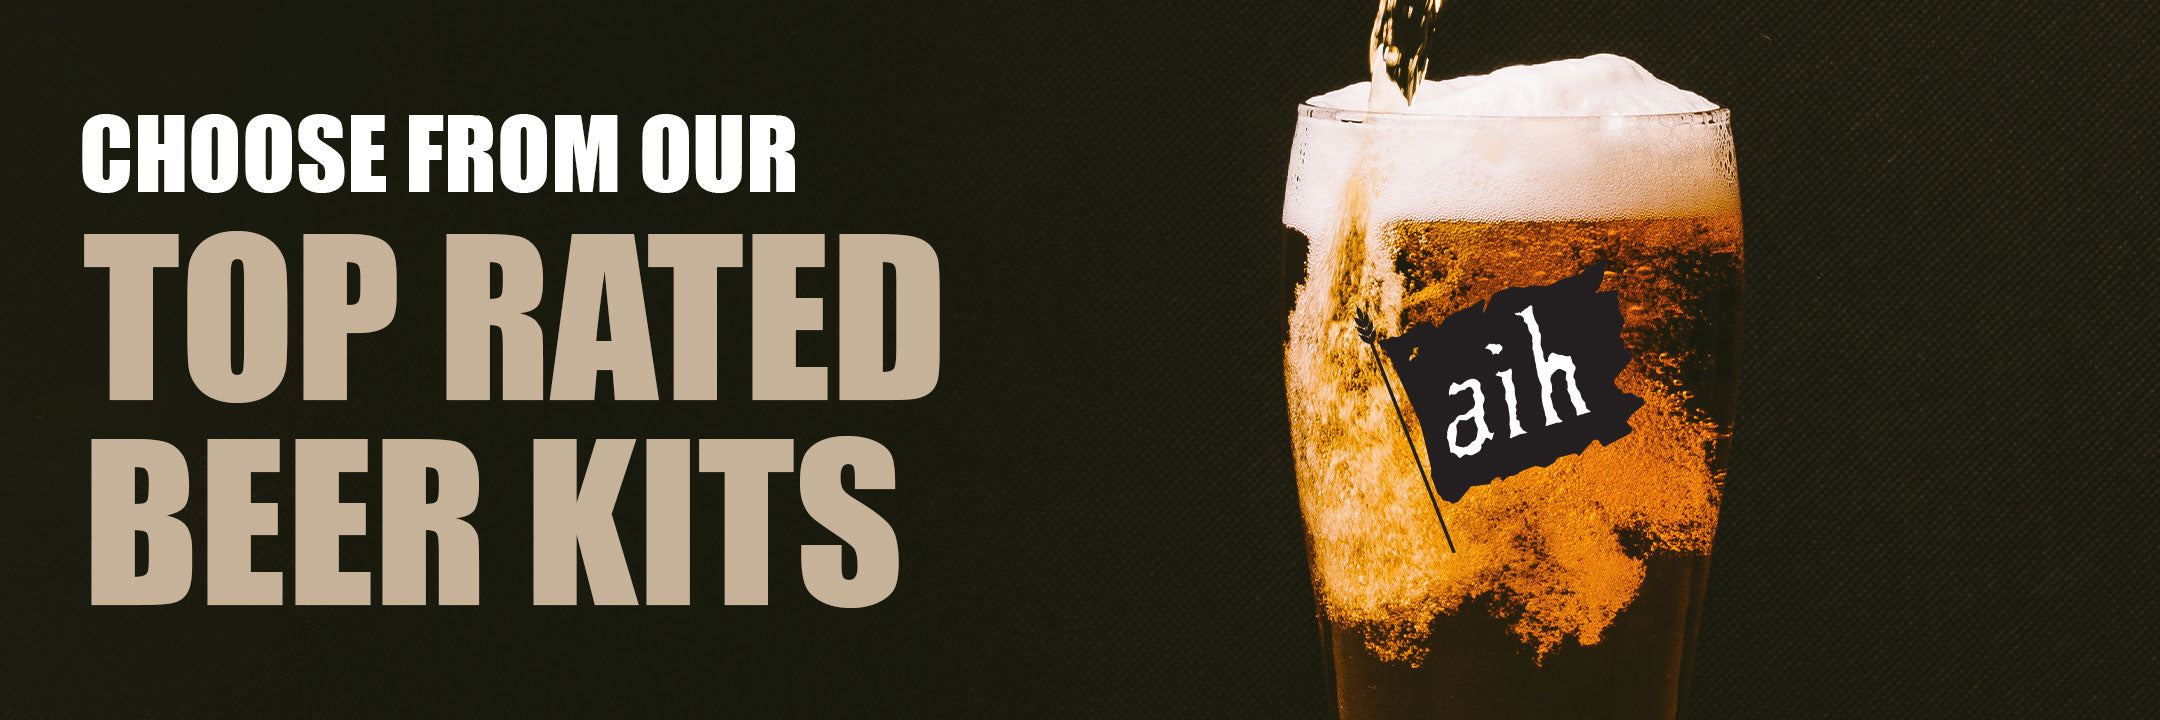 Choose from our Top Rated Beer Recipe Kits